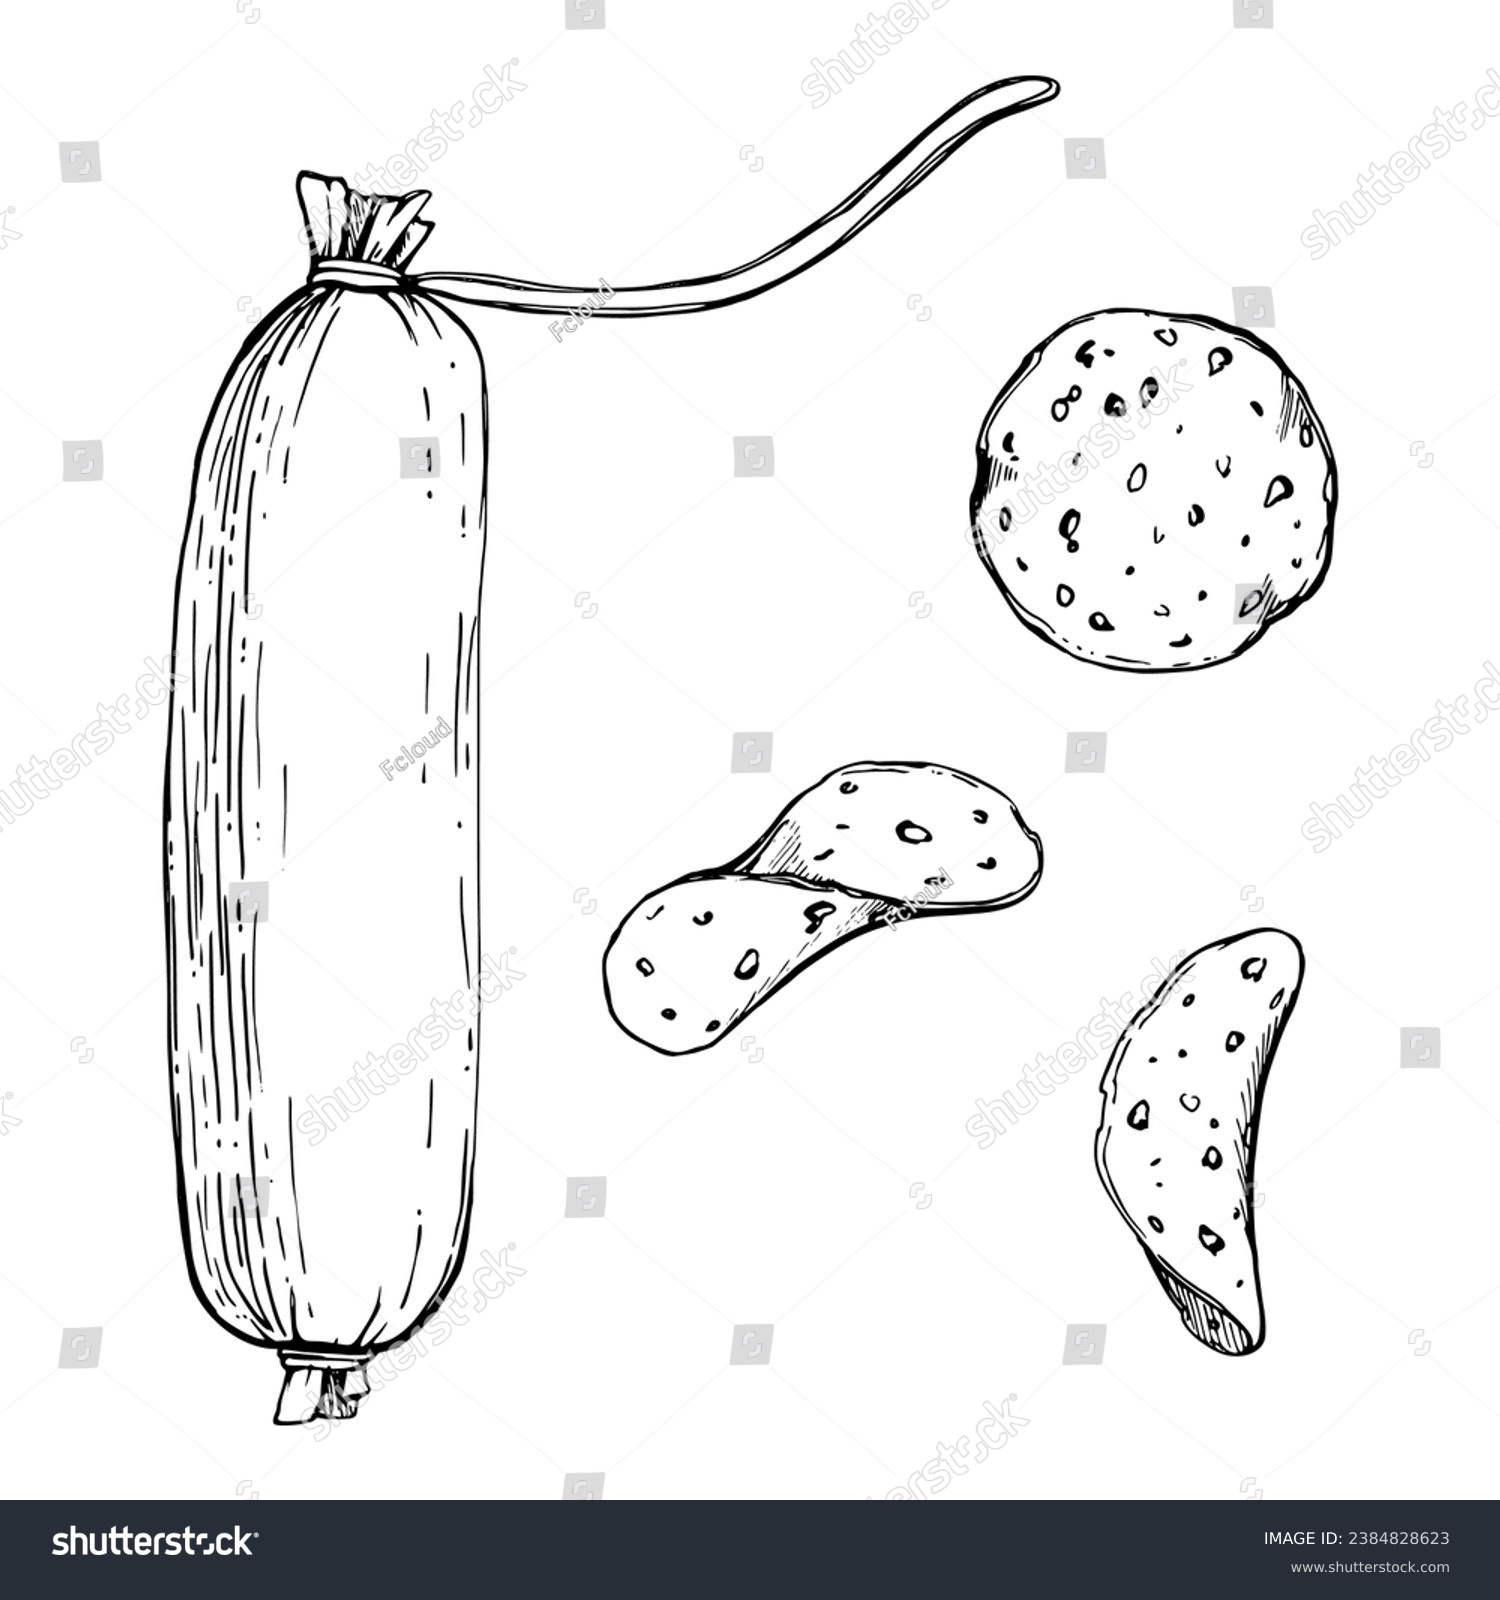 Hand drawn vector ink illustration. Pepperoni salami sausage stick and slices, pizza topping. Single object isolated on white. Design for restaurant, menu, cafe, food shop or package, flyer, print. #2384828623